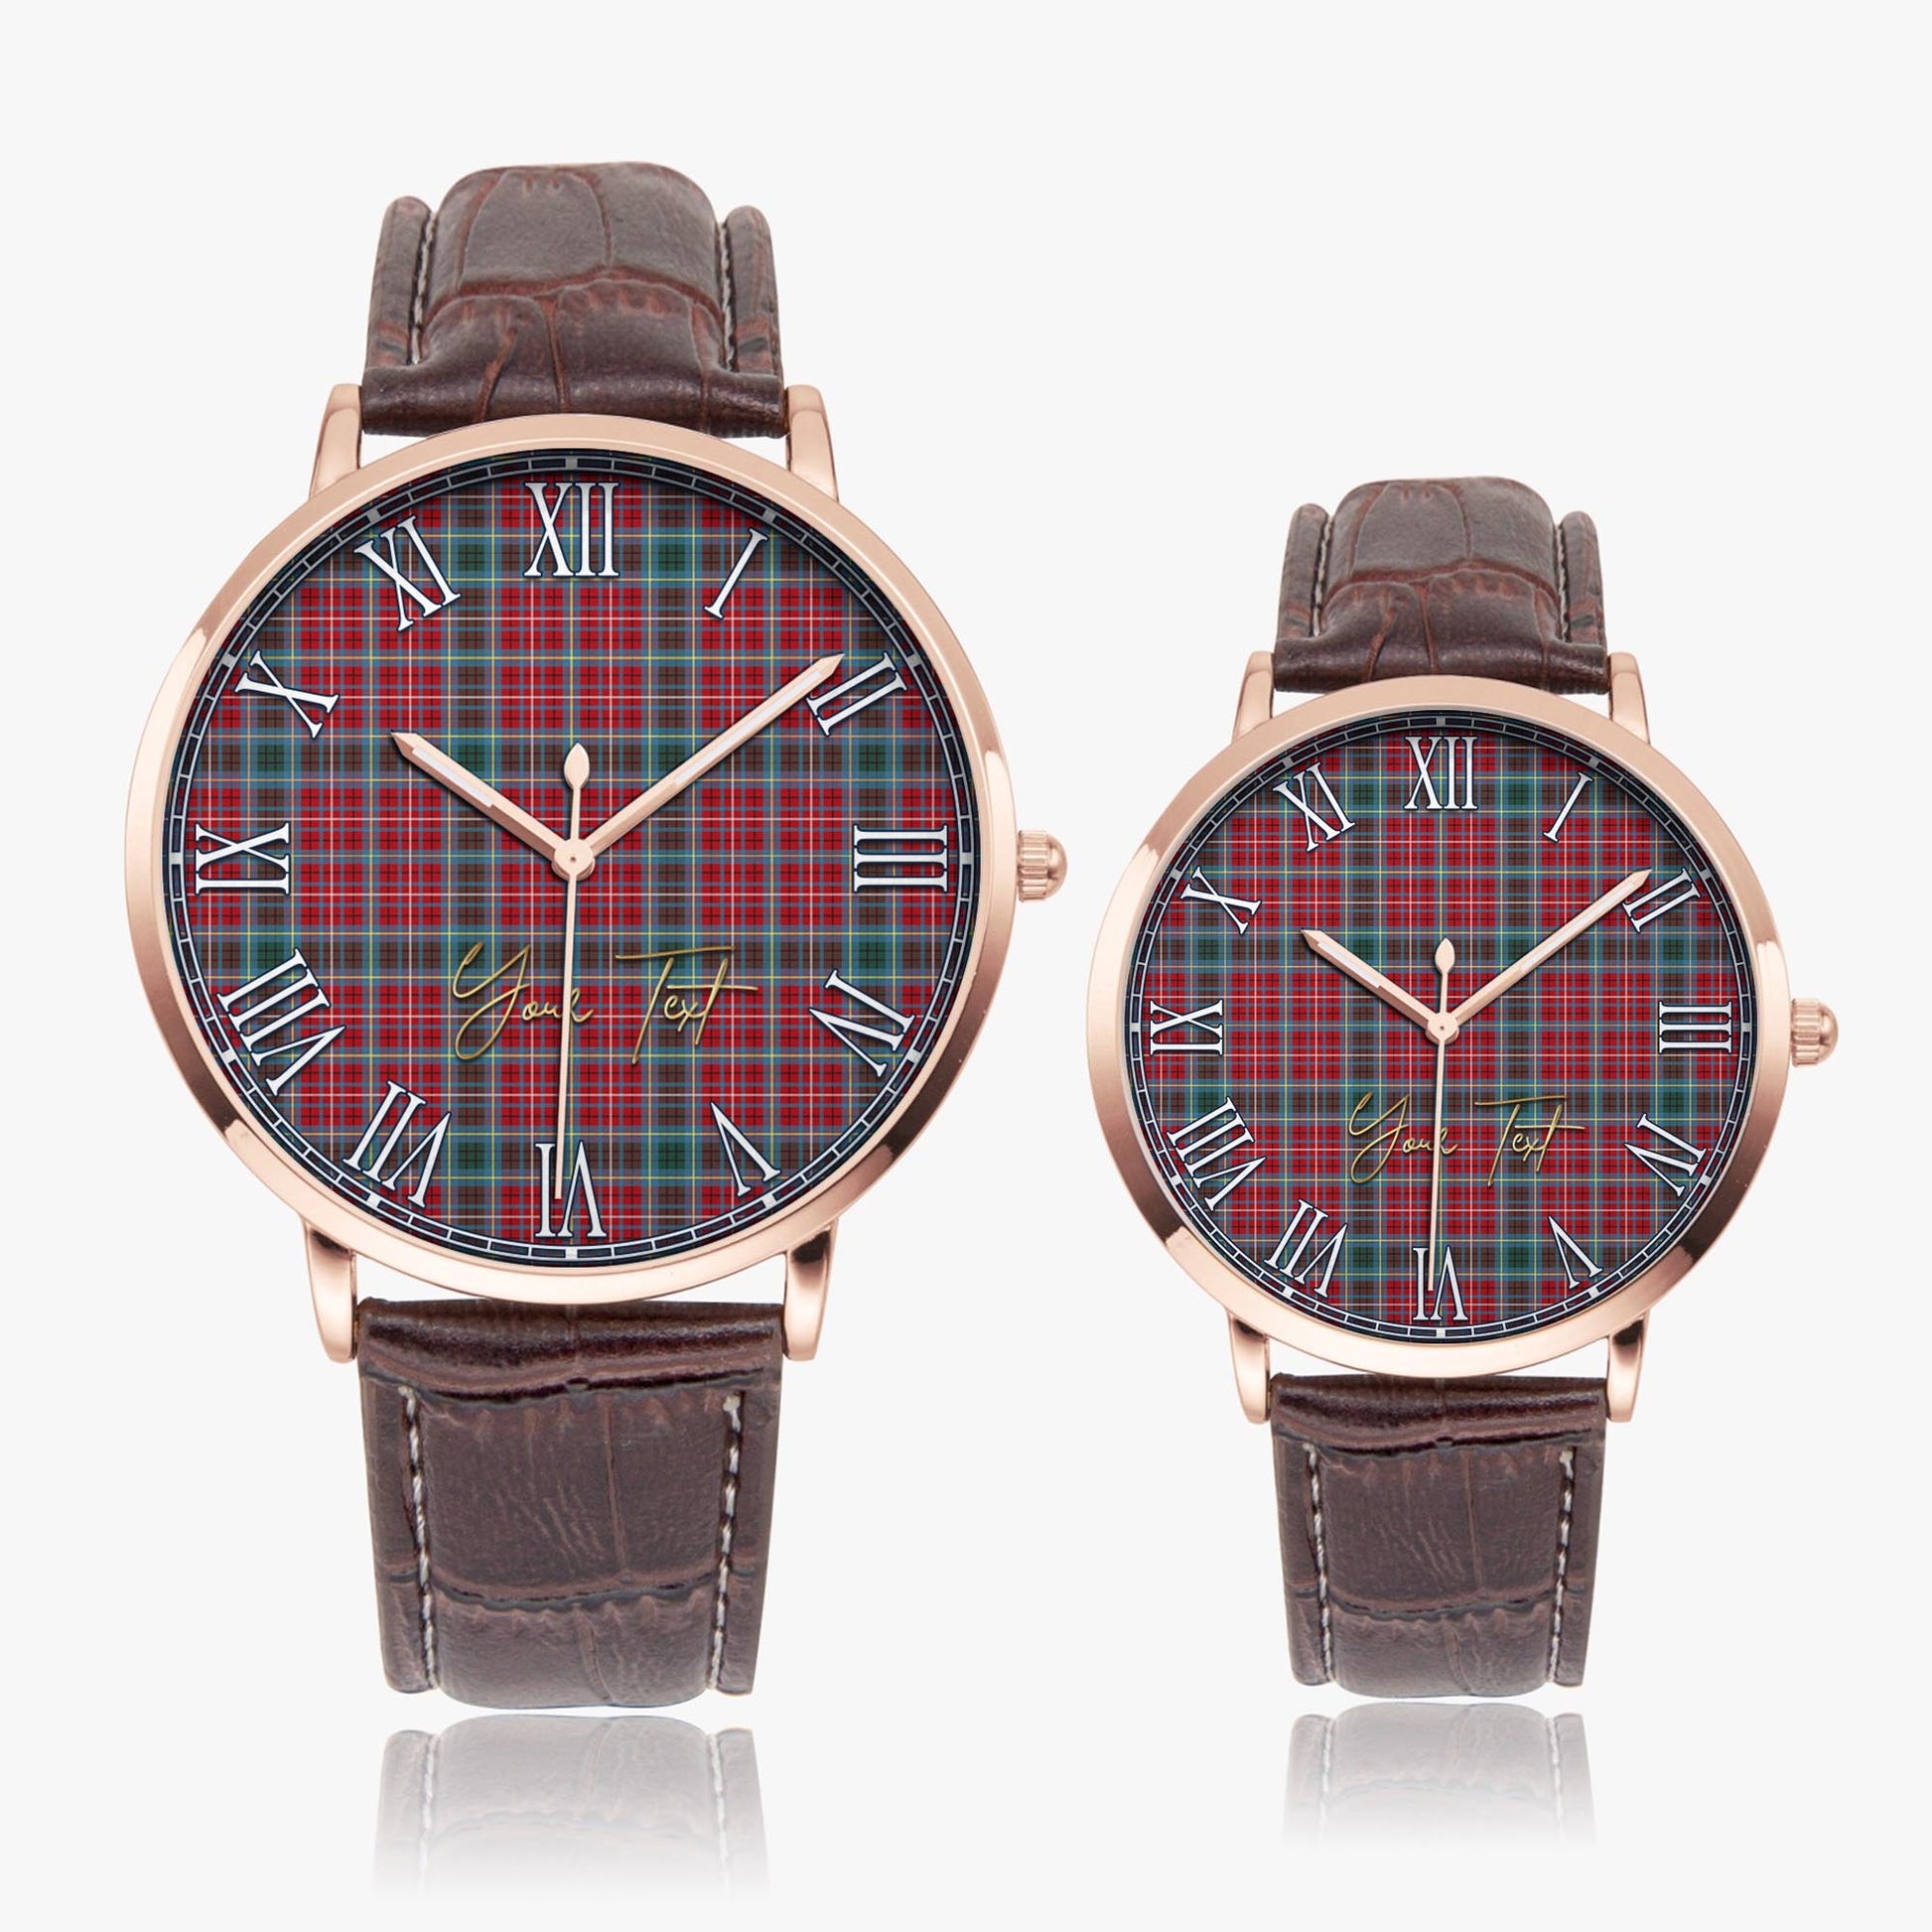 British Columbia Province Canada Tartan Personalized Your Text Leather Trap Quartz Watch Ultra Thin Rose Gold Case With Brown Leather Strap - Tartanvibesclothing